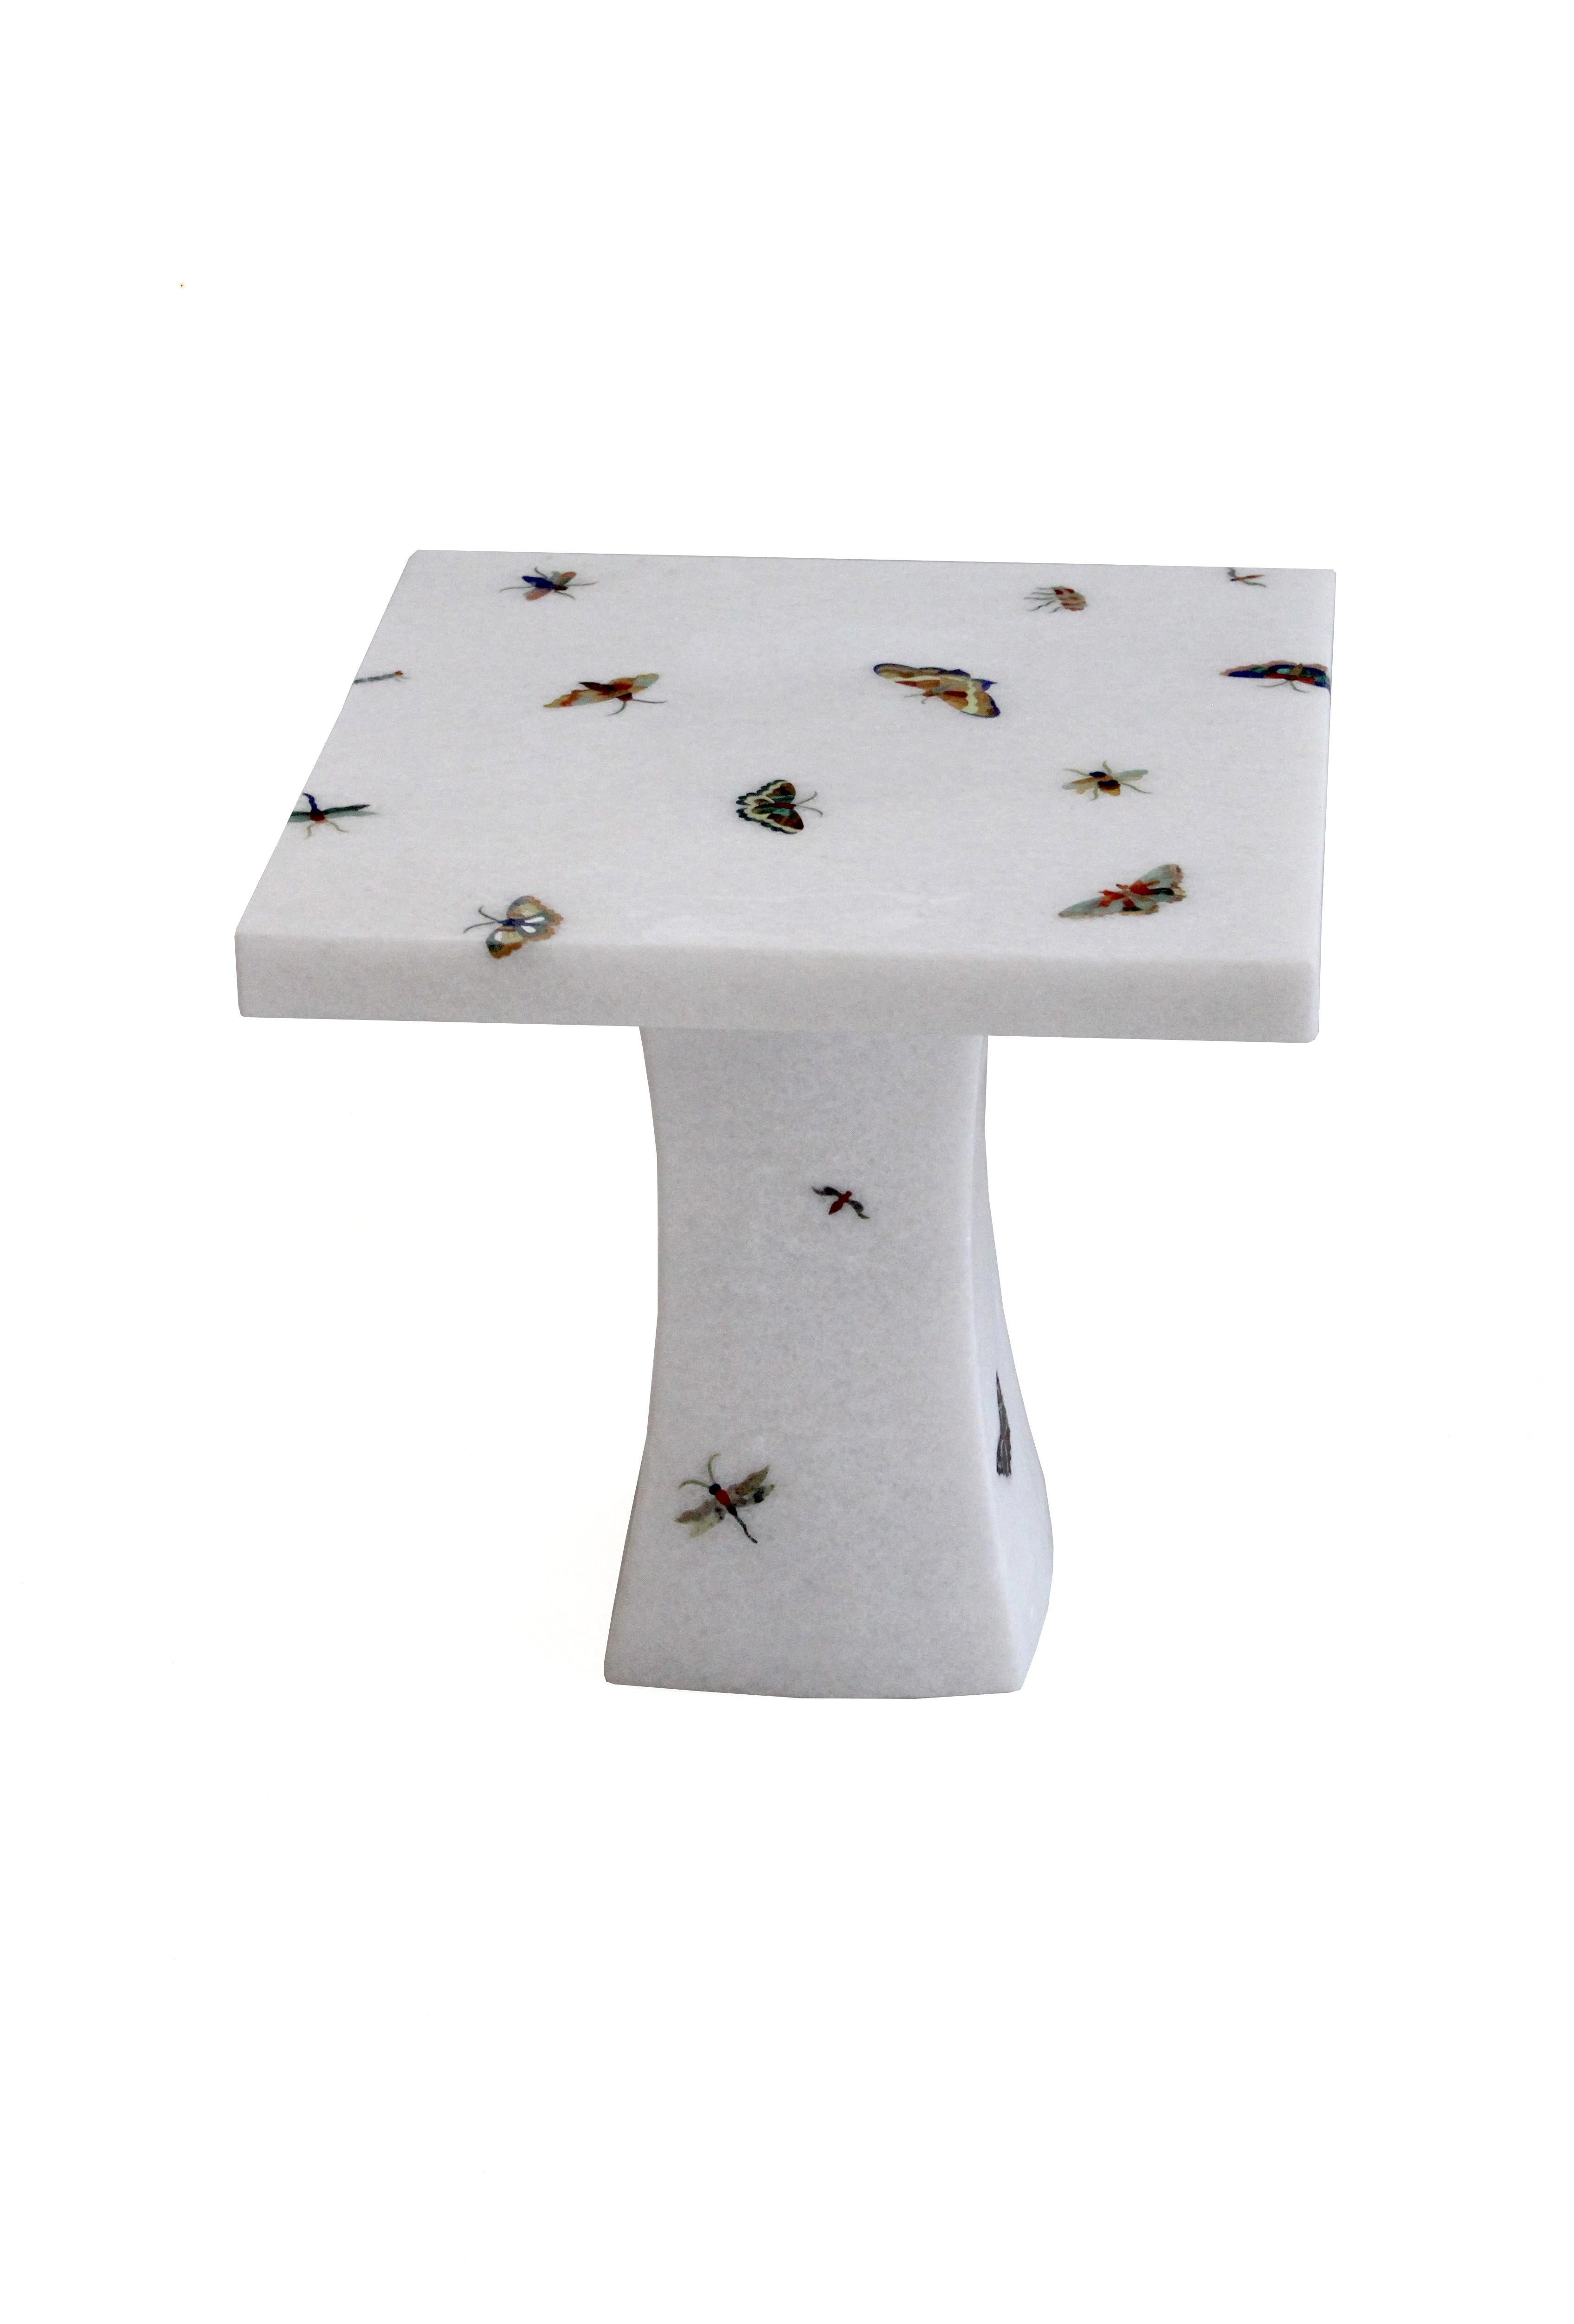 Indian Set of Two Butterfly Inlay Tables in White Marble Handcrafted in India For Sale